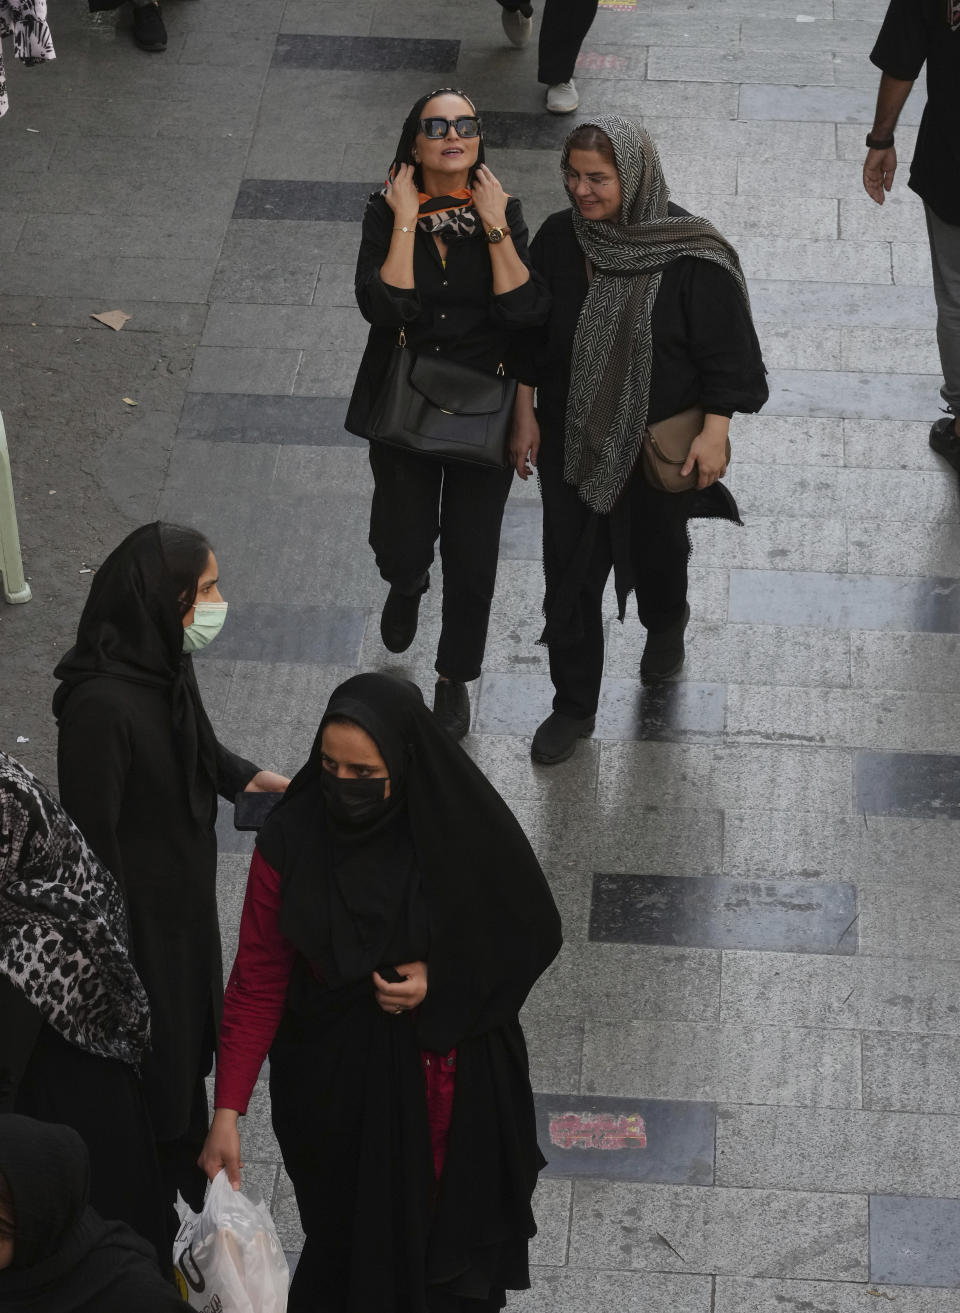 Women walk around in the old main bazaar of Tehran, Iran, Saturday, Oct. 1, 2022. Thousands of Iranians have taken to the streets over the last two weeks to protest the death of Mahsa Amini, a 22-year-old woman who had been detained by the morality police in the capital of Tehran for allegedly wearing her mandatory Islamic veil too loosely. (AP Photo/Vahid Salemi)